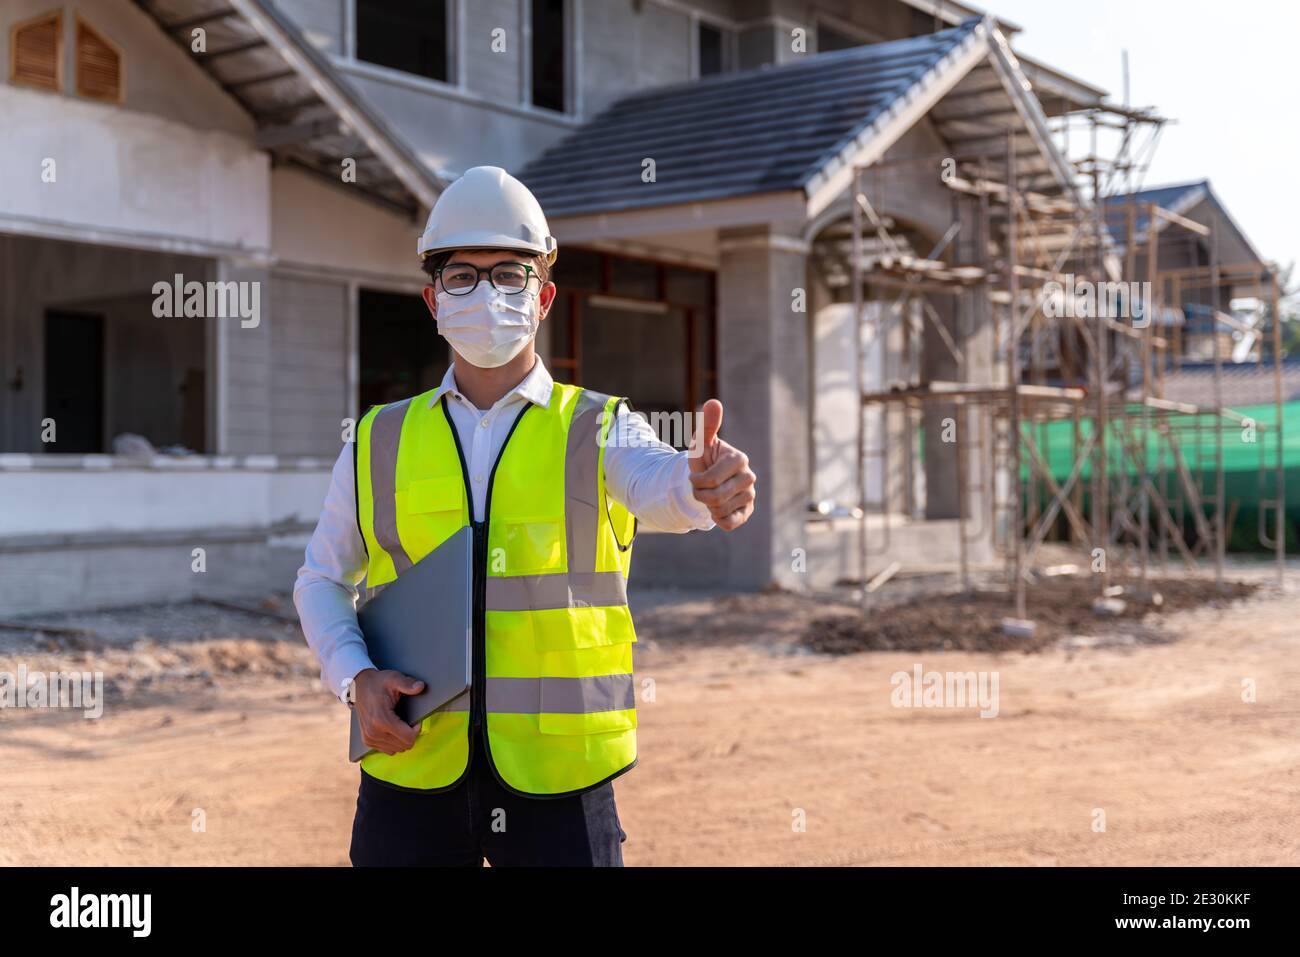 Portrait of Architect wearing a mask on a building construction site, Homebuilding Ideas and Prevention of Coronavirus Disease. Stock Photo